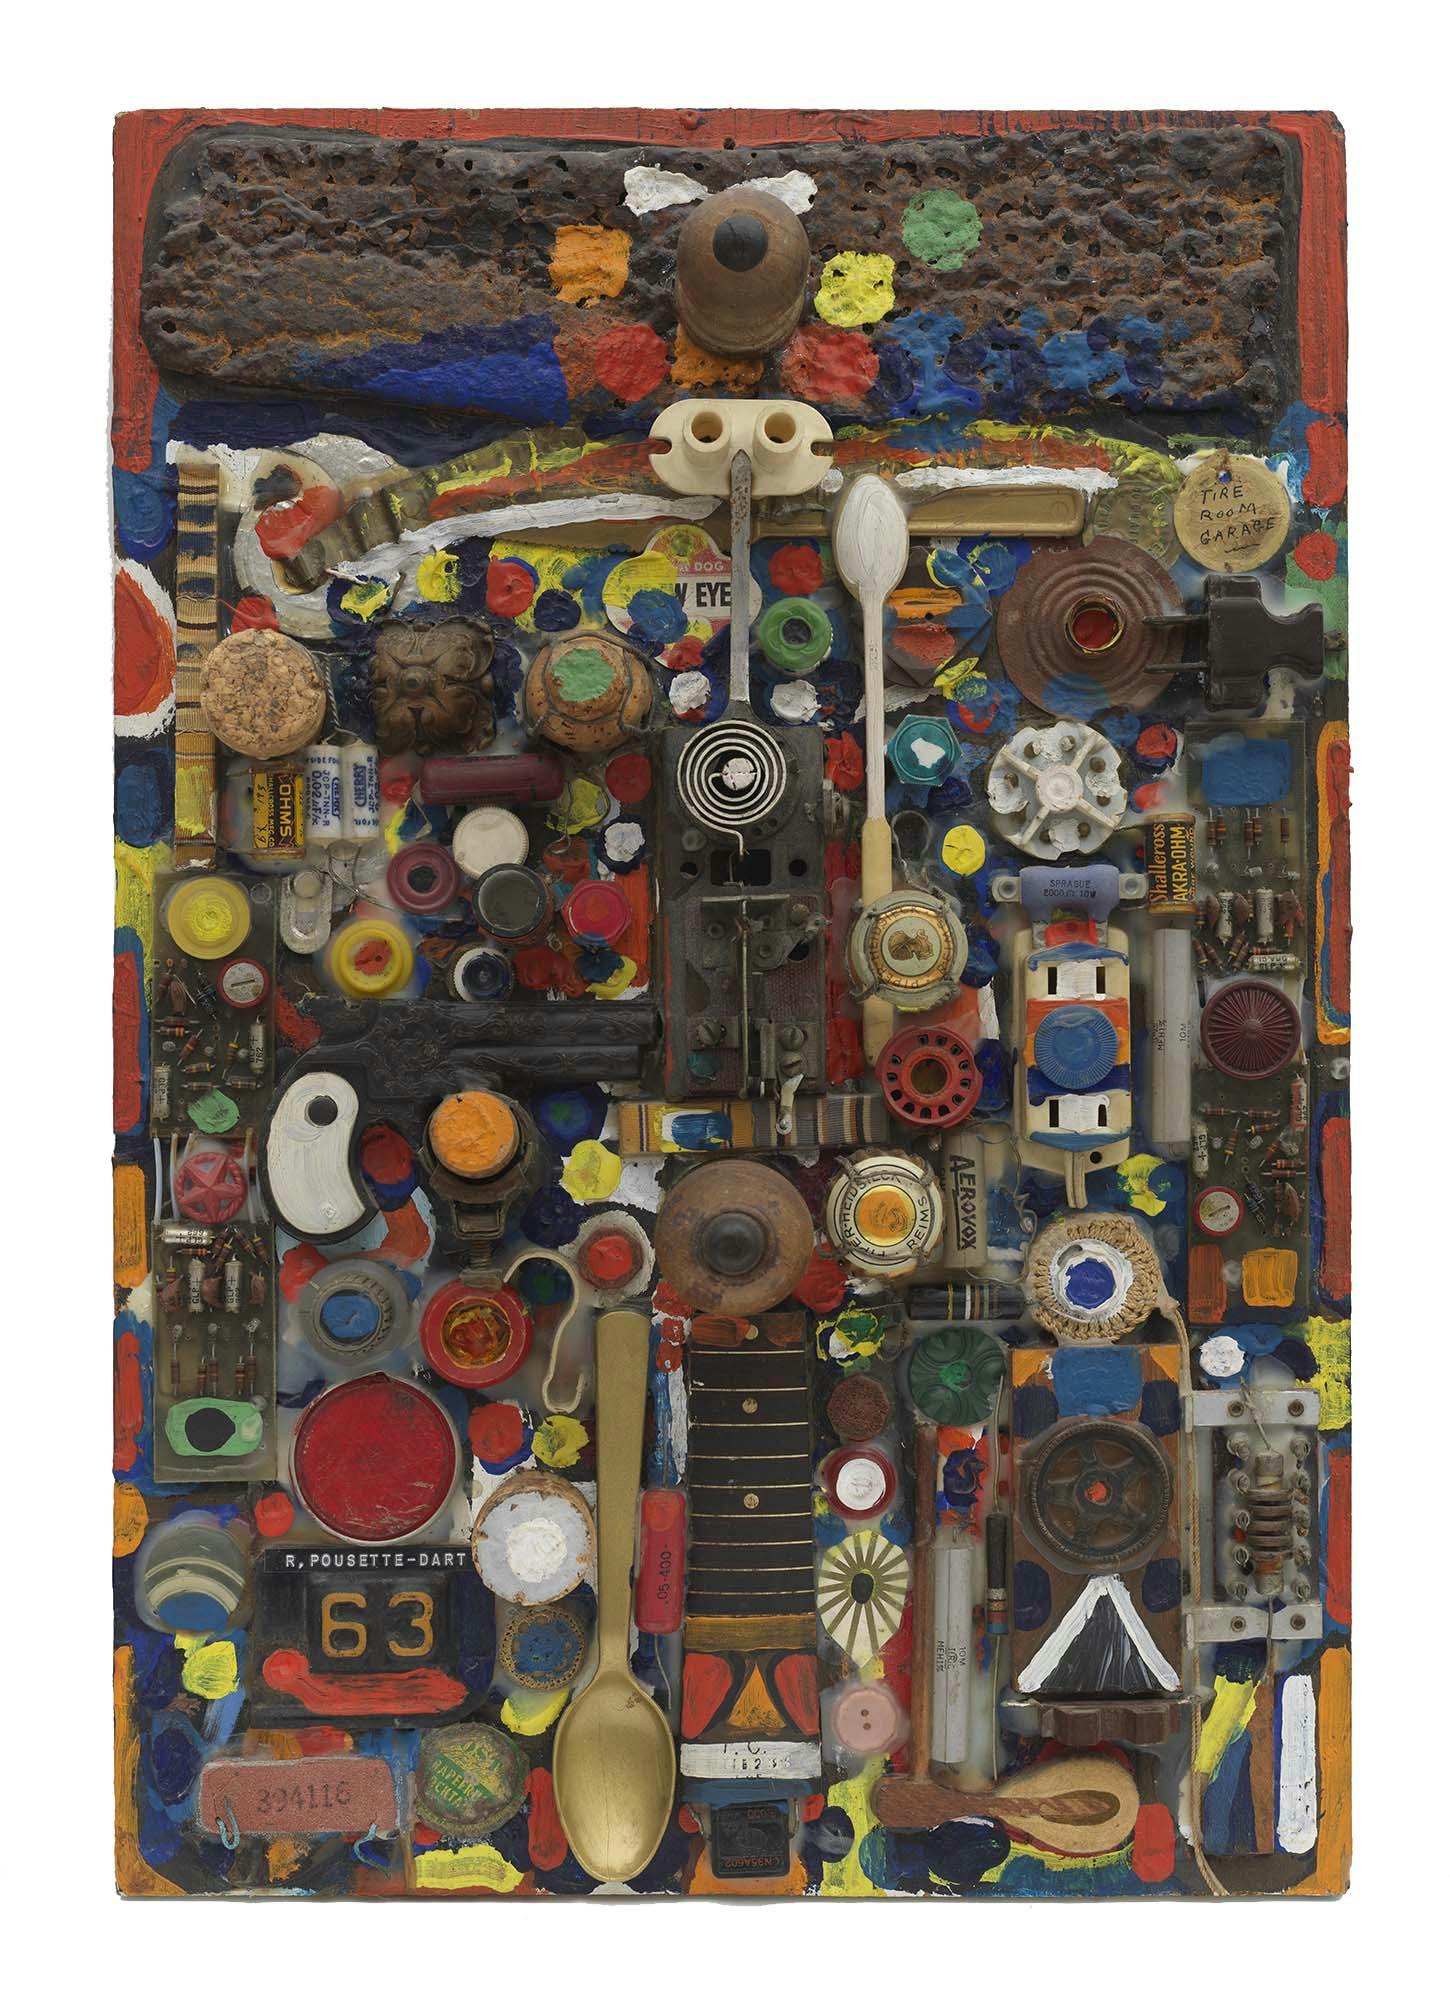 Untitled
1963
Mixed media: found objects and acrylic on wood
18 7/8 x 13 x 3 3/4 in. (47.9 x 33 x 9.5 cm)
 – The Richard Pousette-Dart Foundation